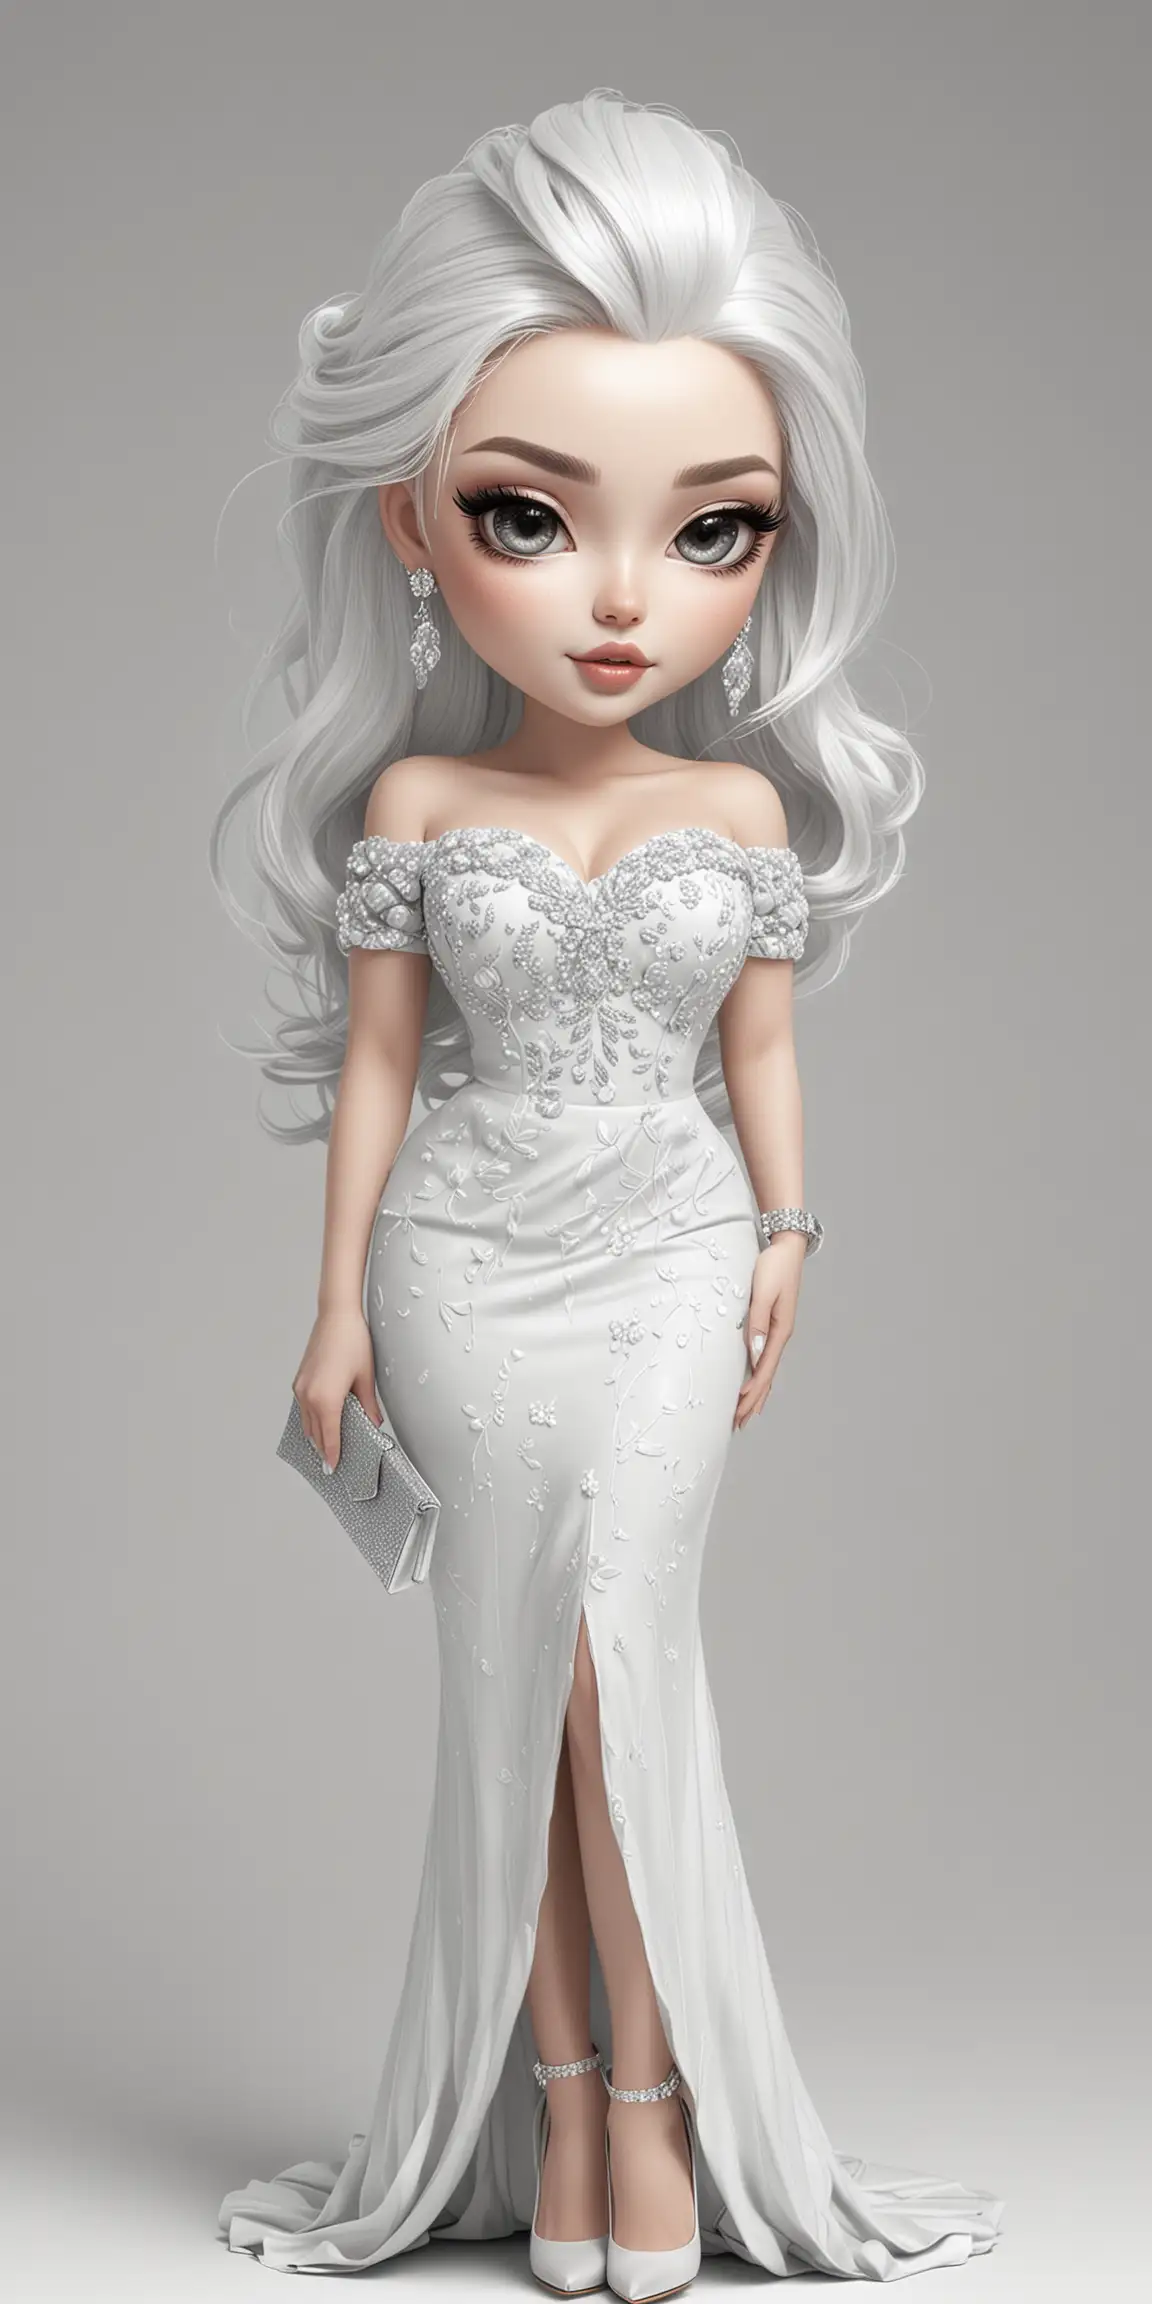 Black and white illustration, Beautiful  woman with white hair, chibi style, long hair, elegant, wearing an off-the-shoulder evening dress, plump lips, big almond eyes, shimmering make up, full length , high heels, white background, black and white, light grayscale , wearing jewelry, jewelry in hair, holding a clutch purse